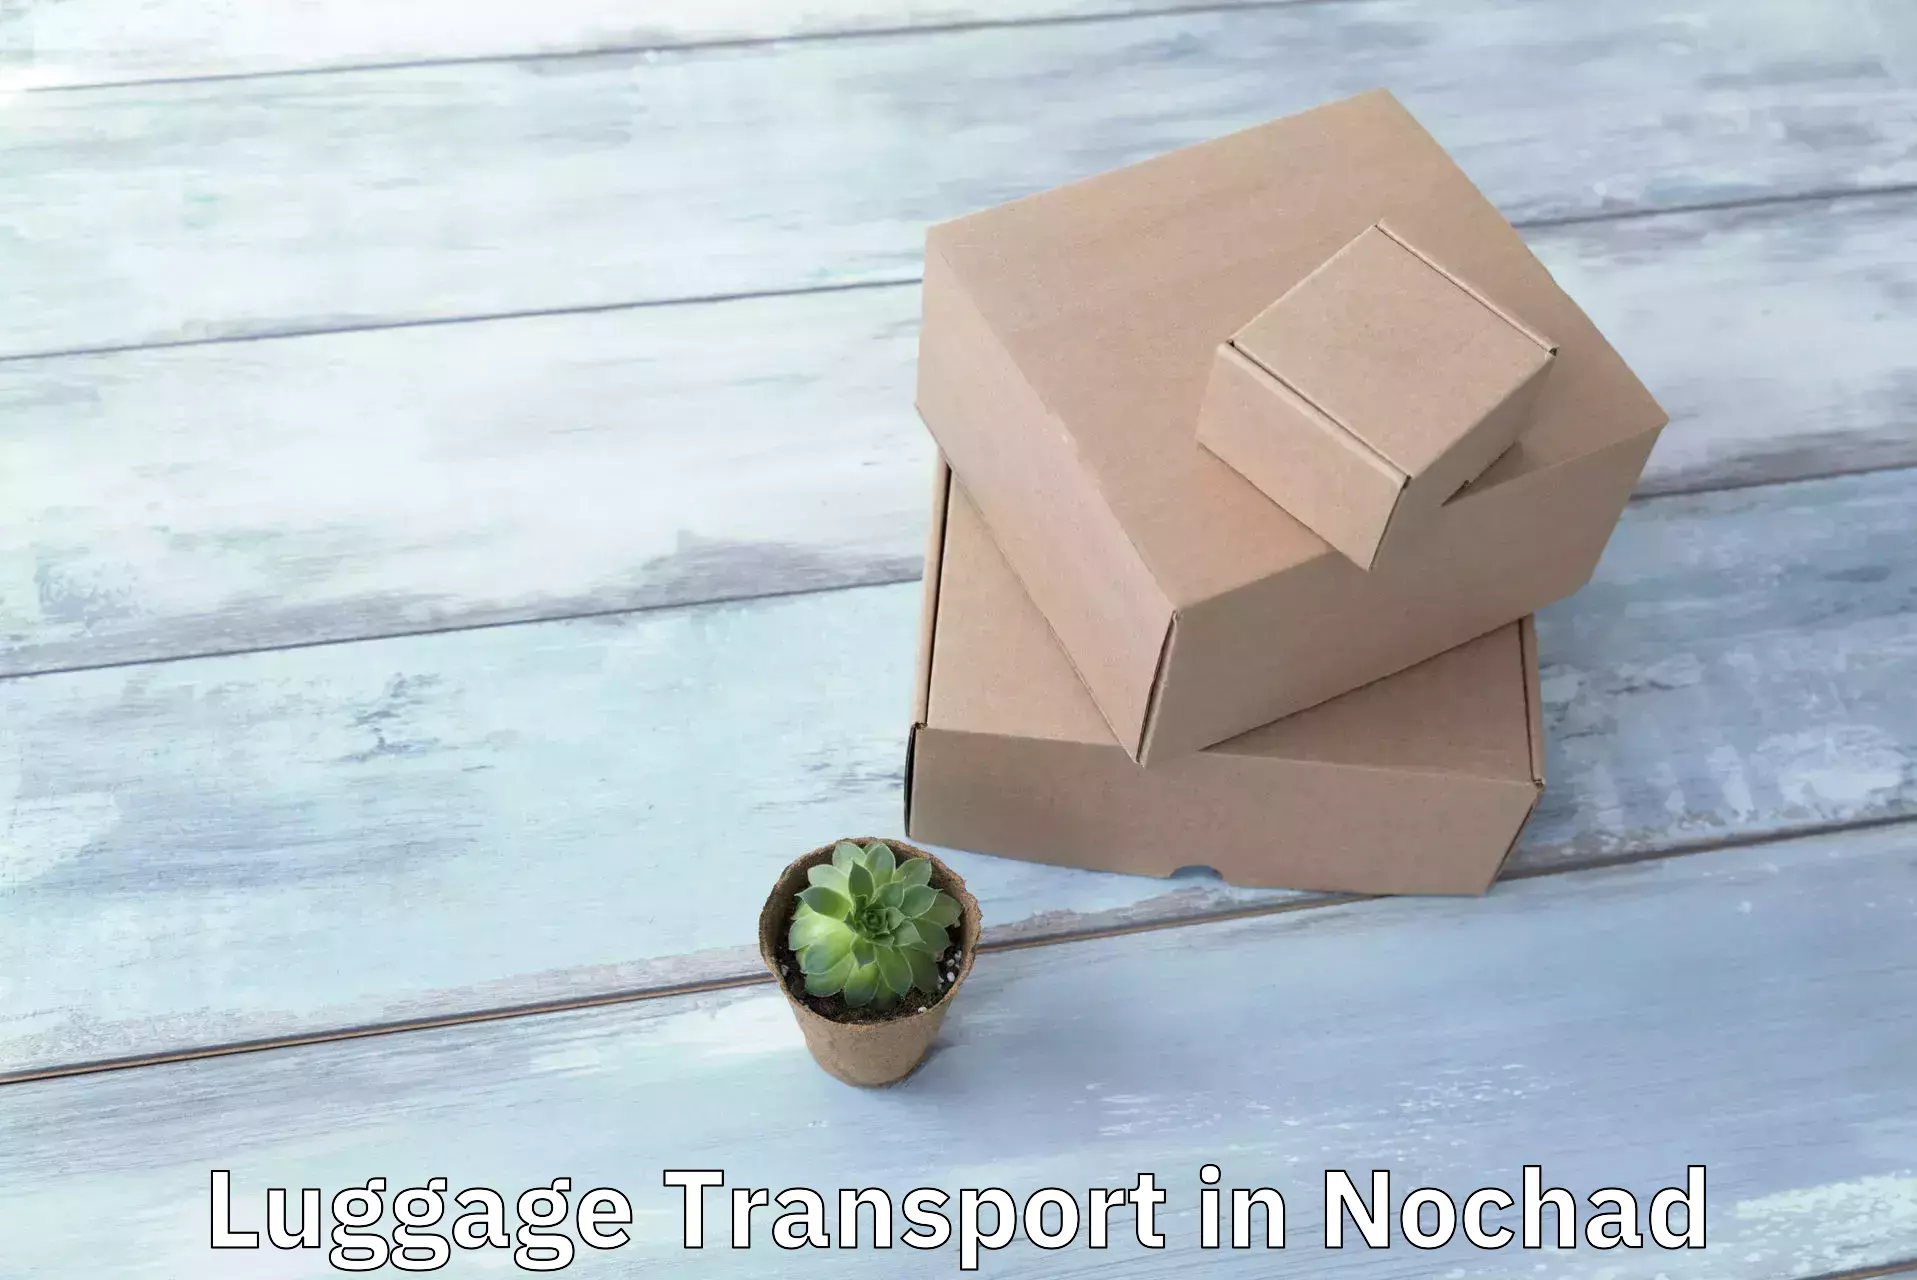 Personal luggage delivery in Nochad